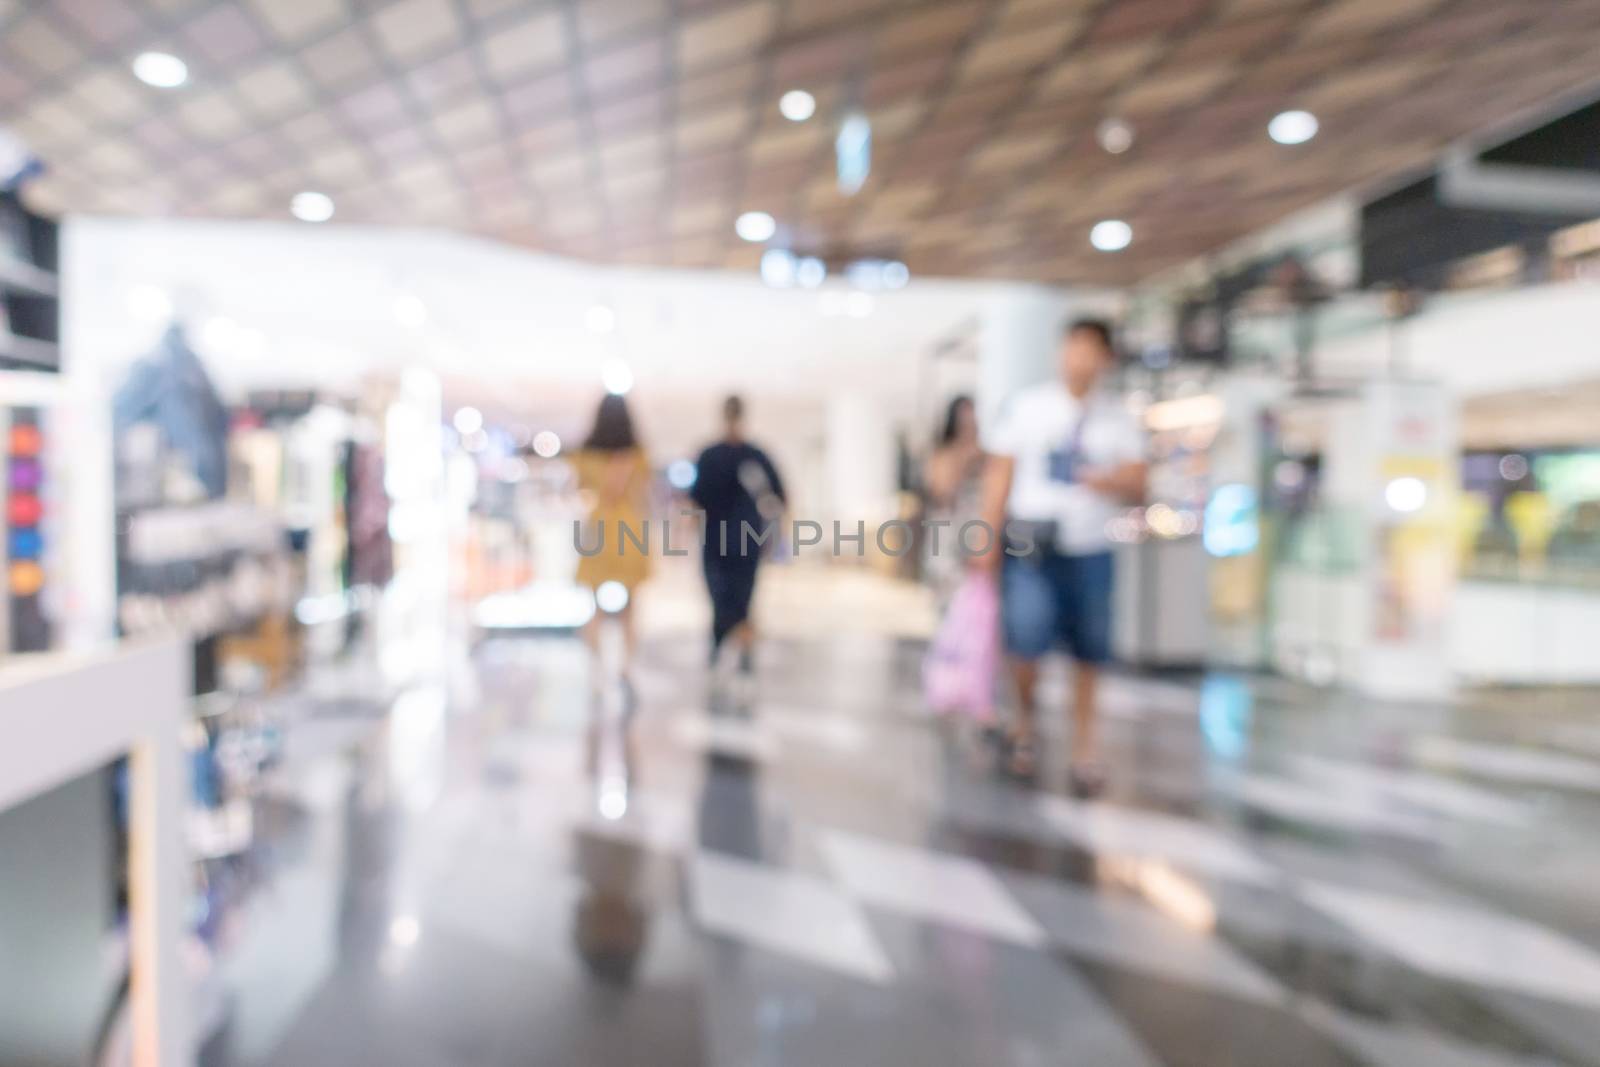 Abstract defocused with bokeh image of shopping mall and people walking for background usage.